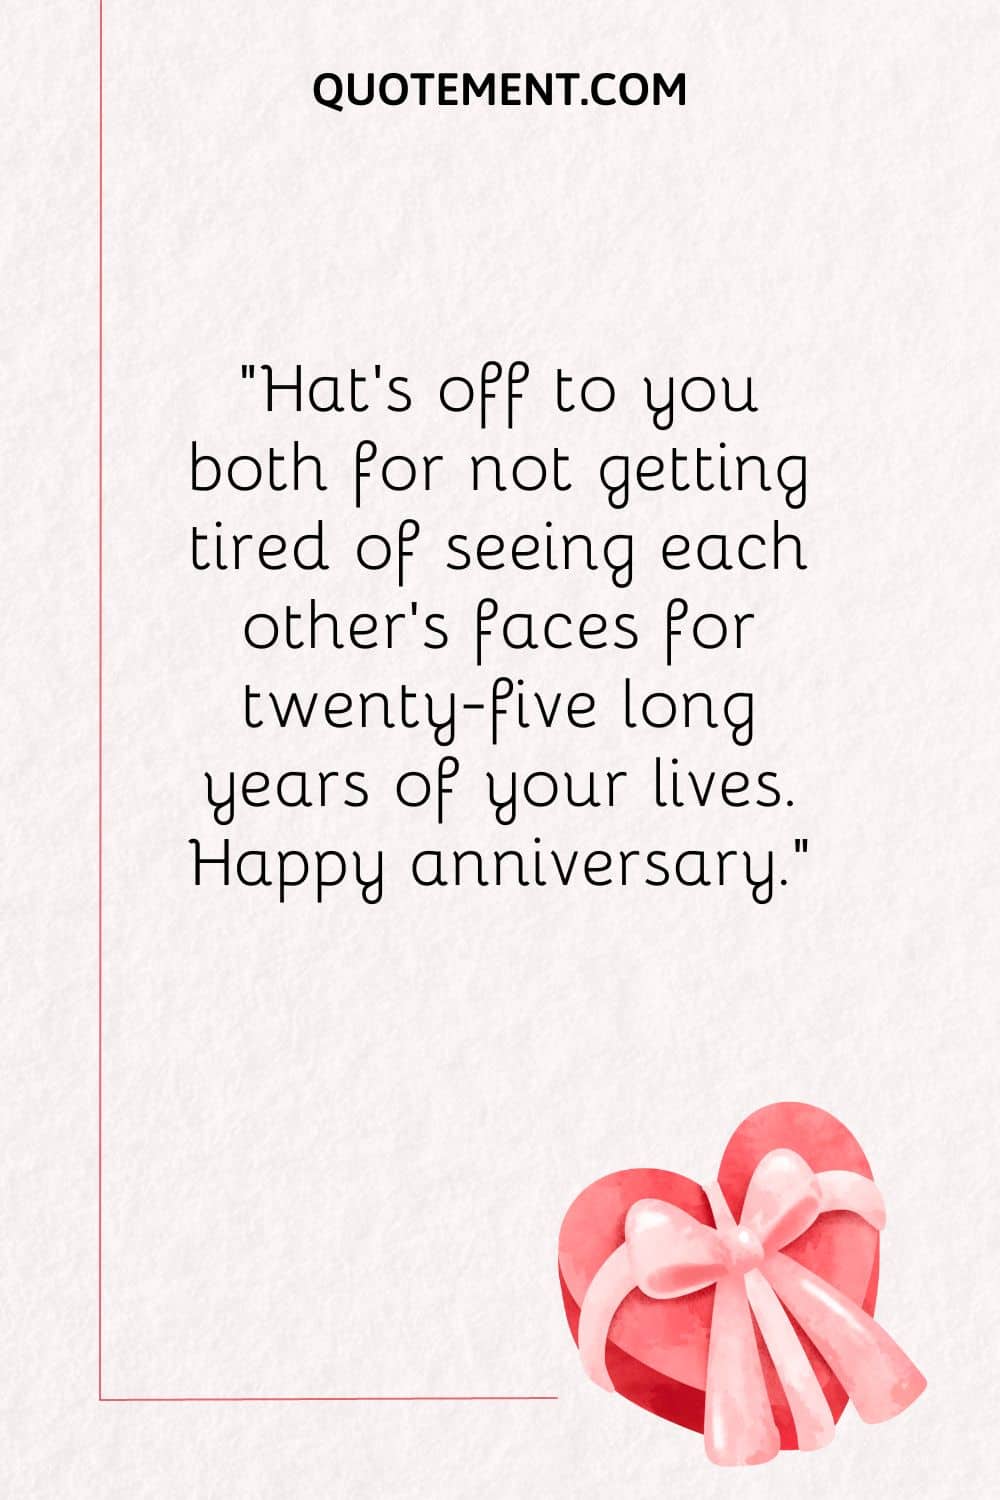 Hat’s off to you both for not getting tired of seeing each other’s faces for twenty-five long years of your lives